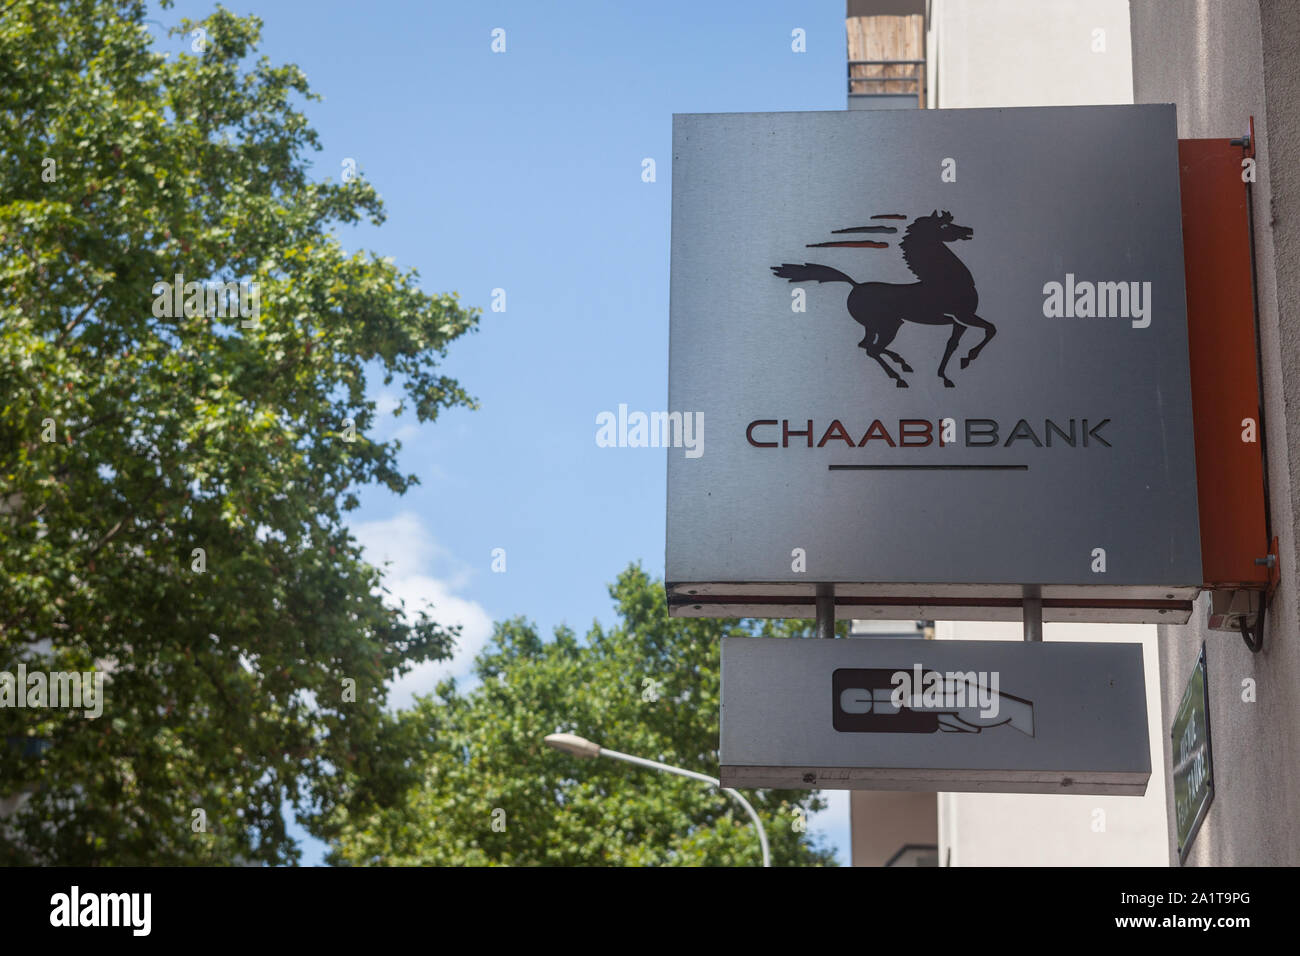 LYON, FRANCE - JULY 15, 2019: Chaabi Bank logo in front of their main office in Lyon. Also called Banque Chaabi du Maroc, BCDM, it is the French branc Stock Photo